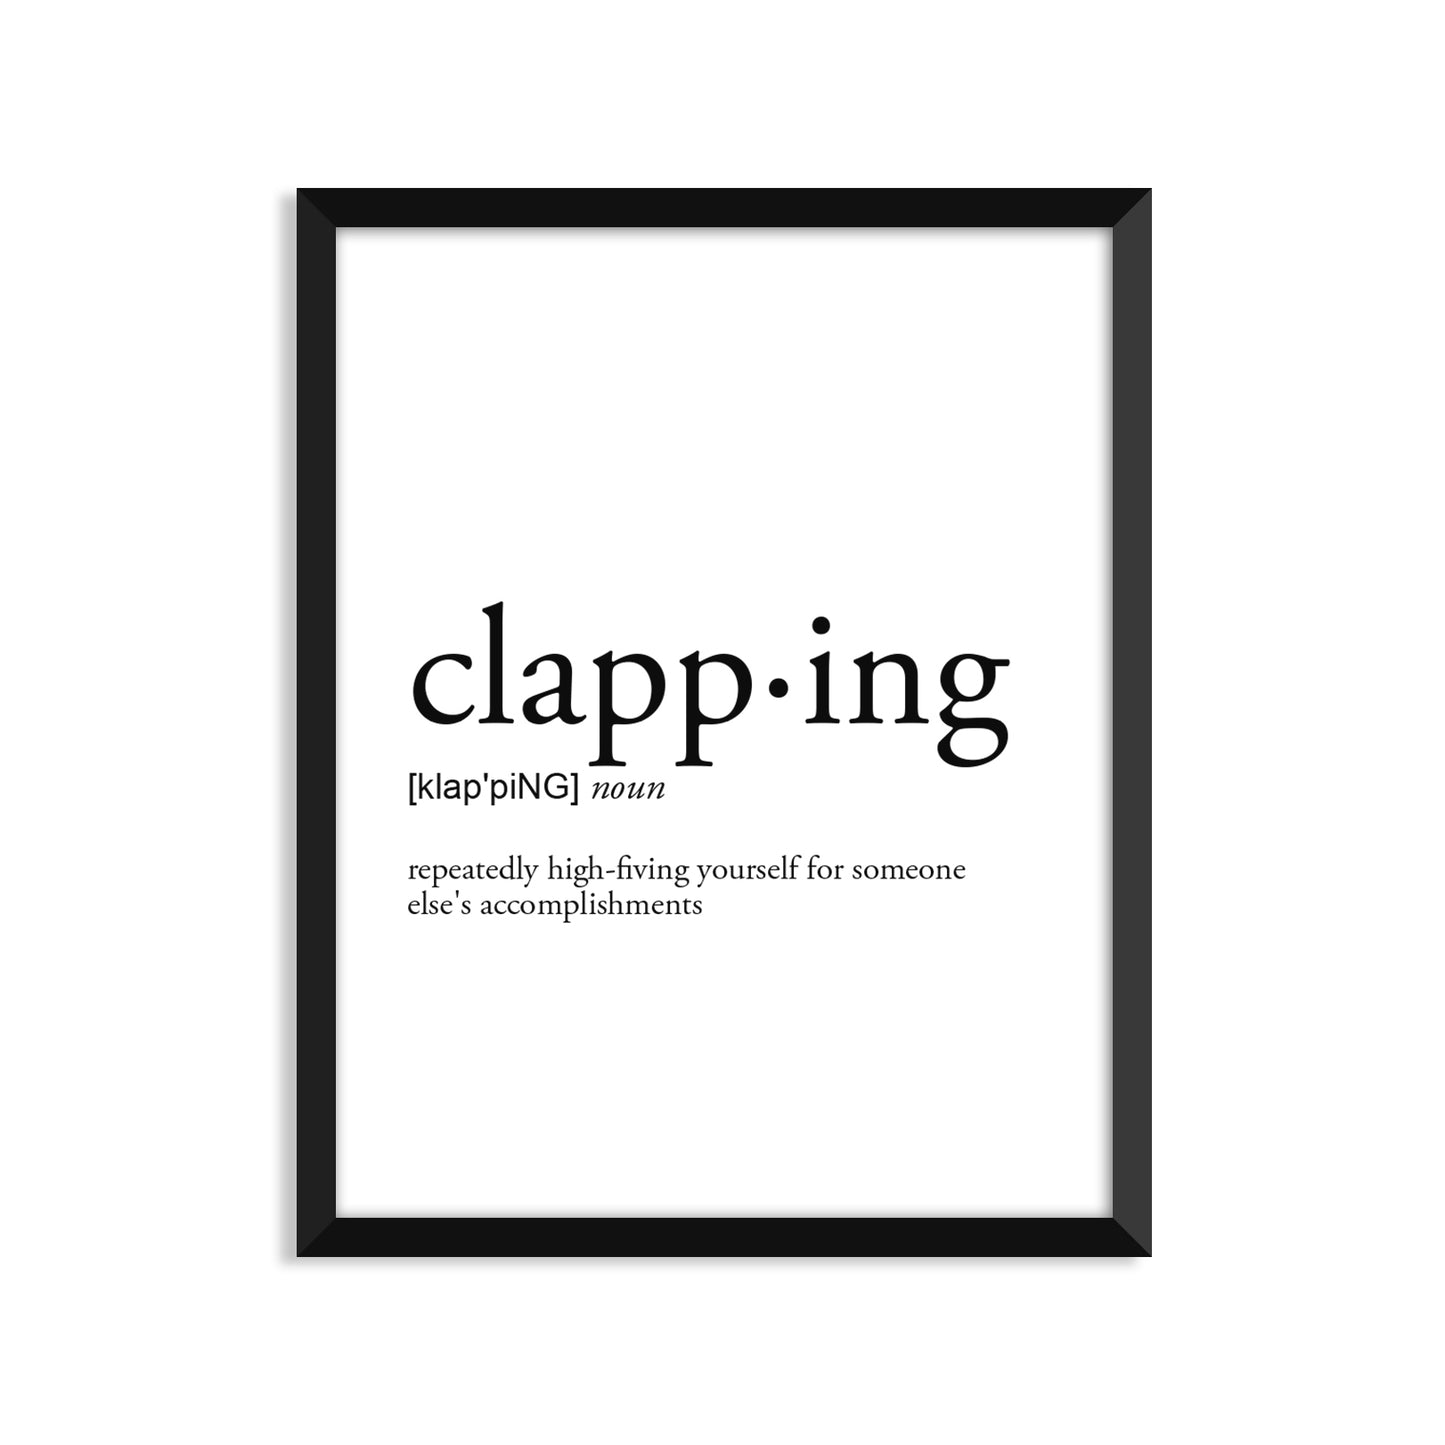 Clapping Definition - Unframed Art Print Or Greeting Card